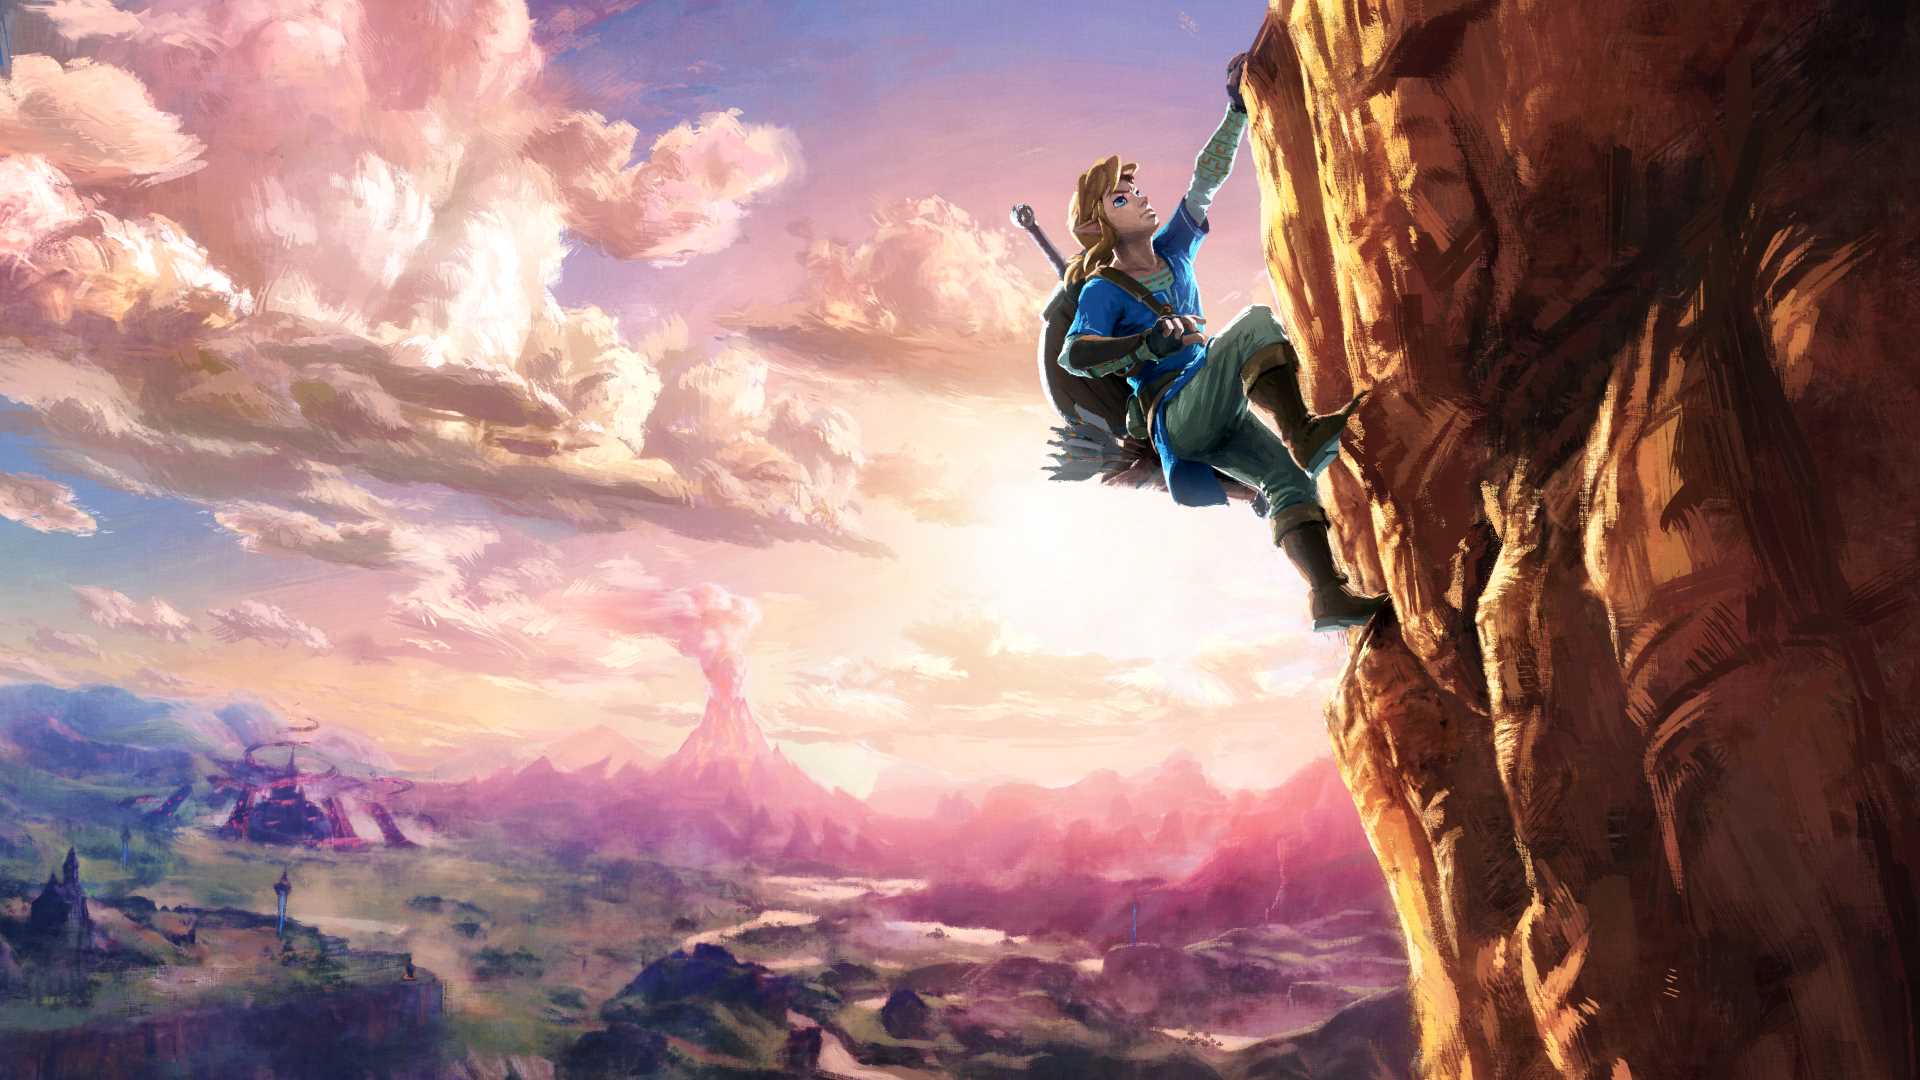 Zelda: Breath of the Wild is already one of the best-reviewed